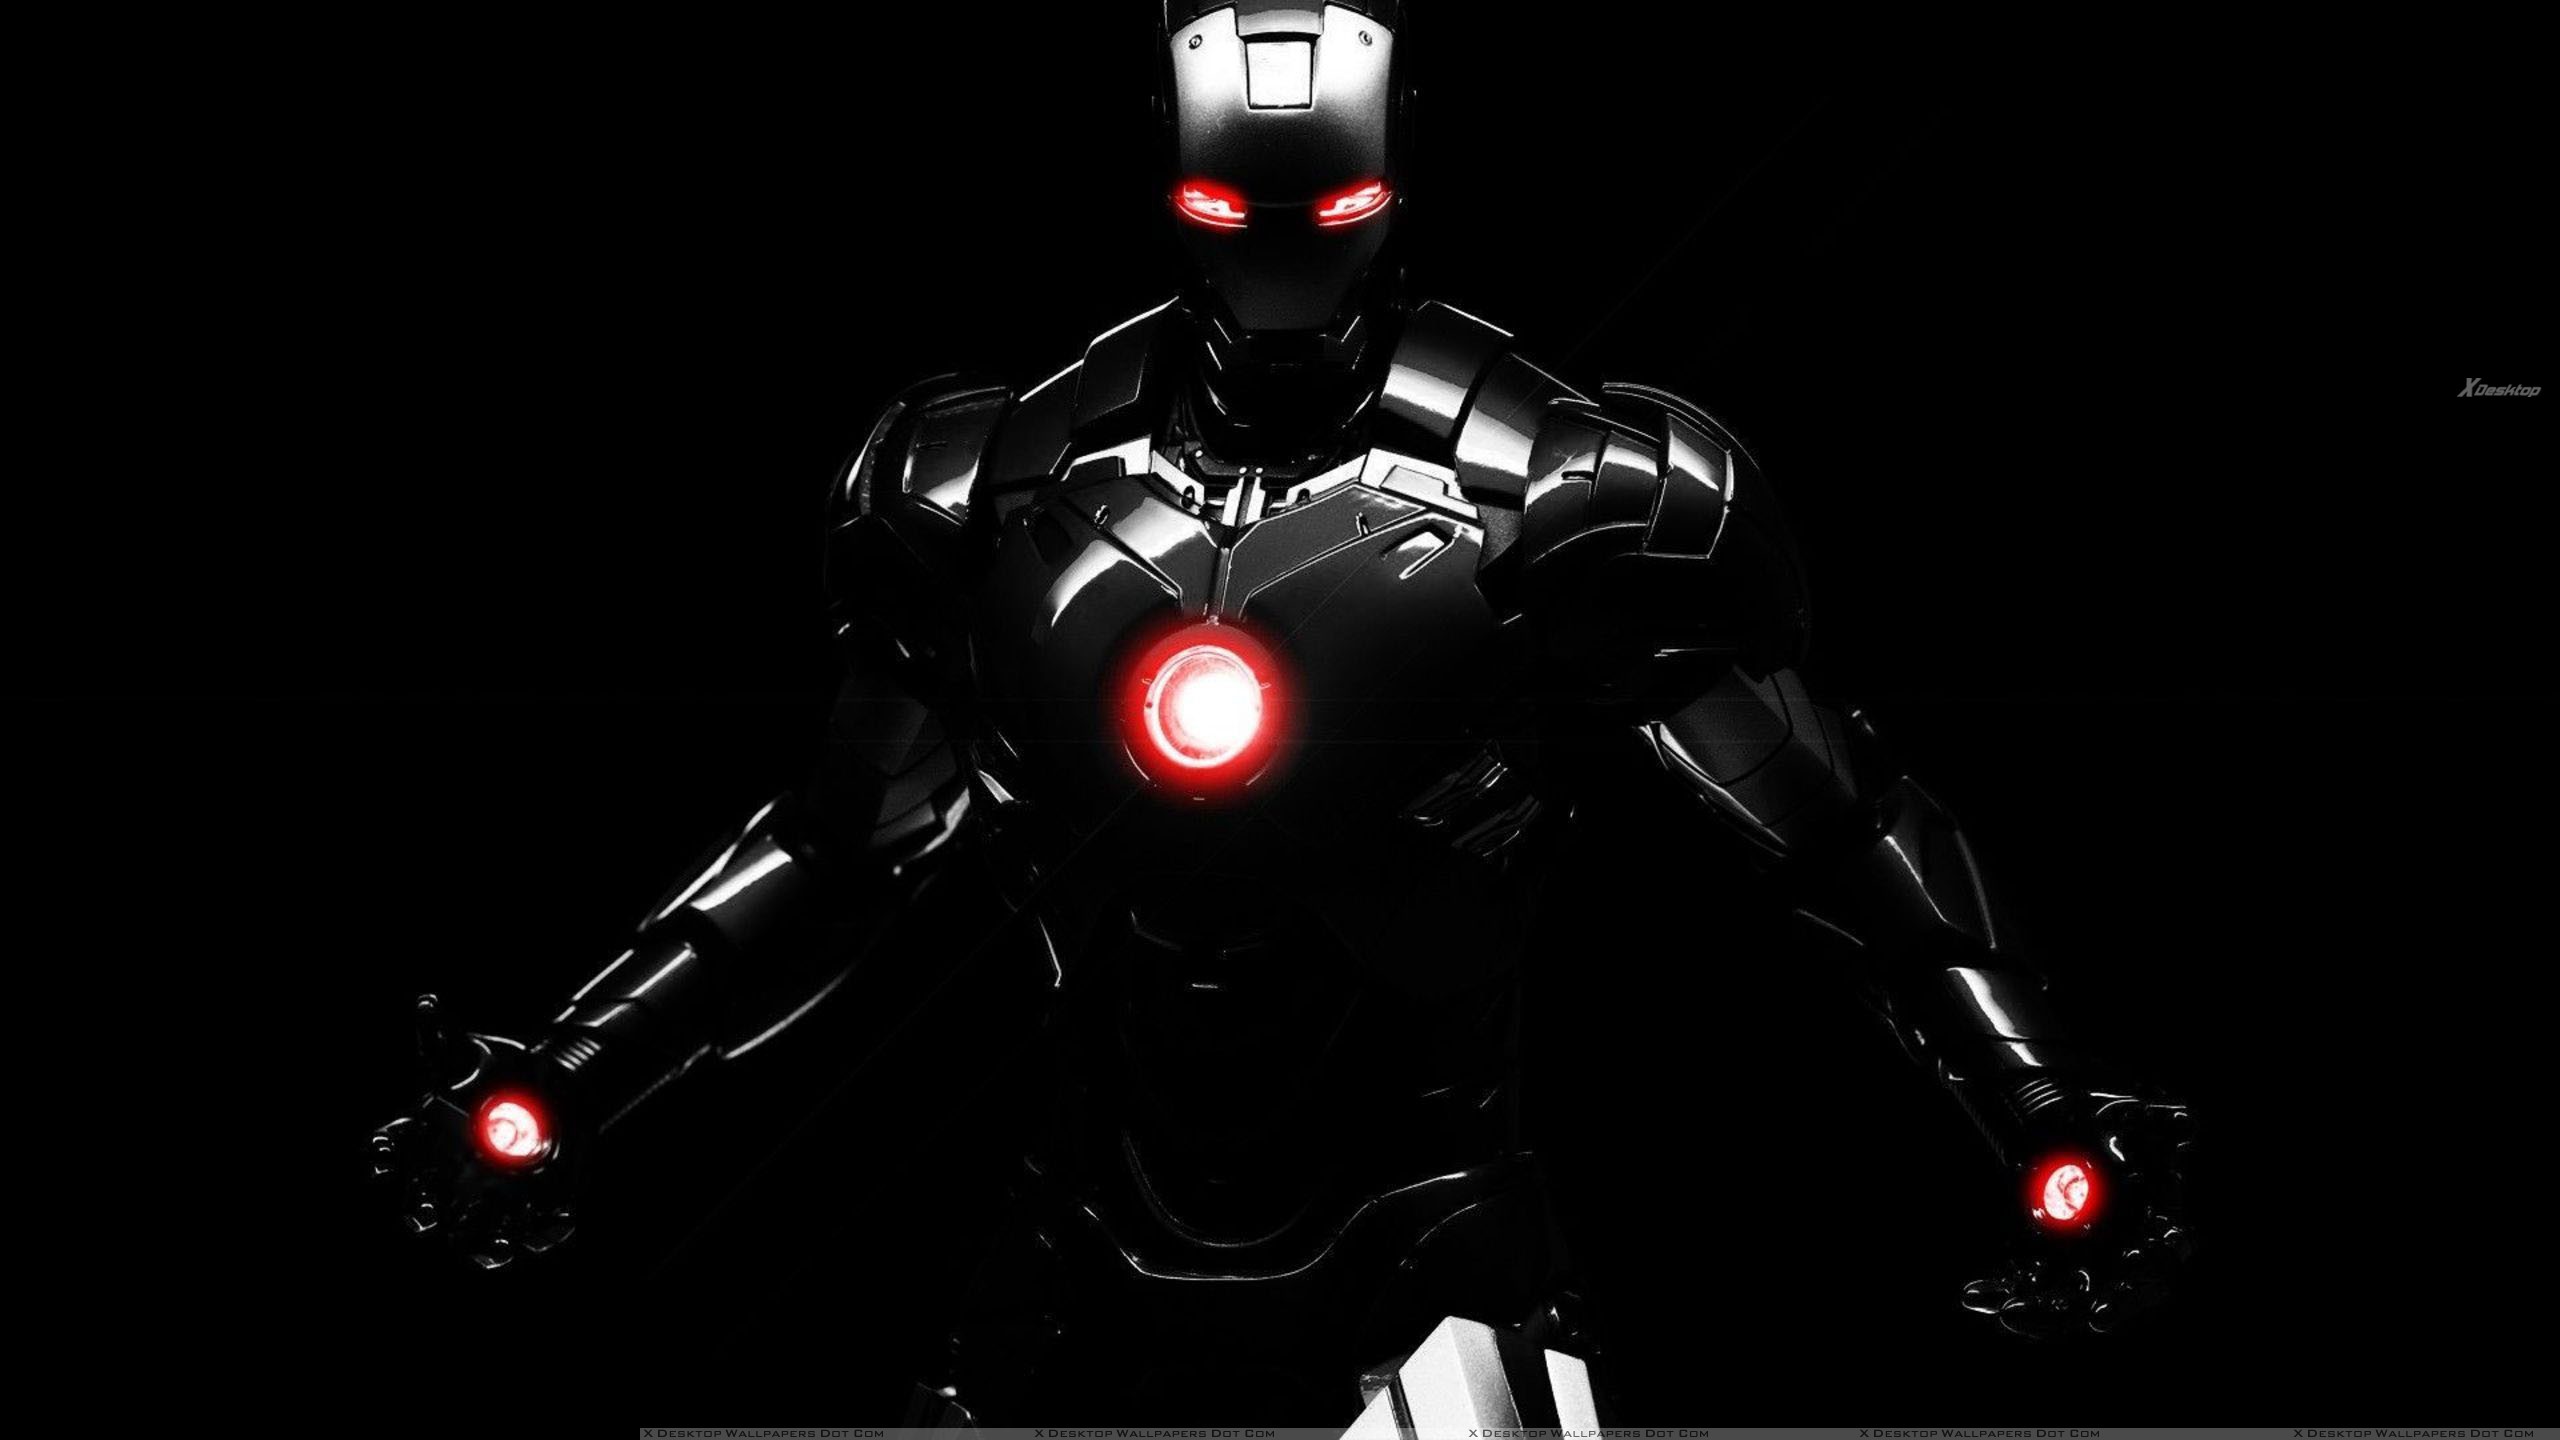 Free Download Iron Man Suit Wallpapers Images Pictures Becuo X For Your Desktop